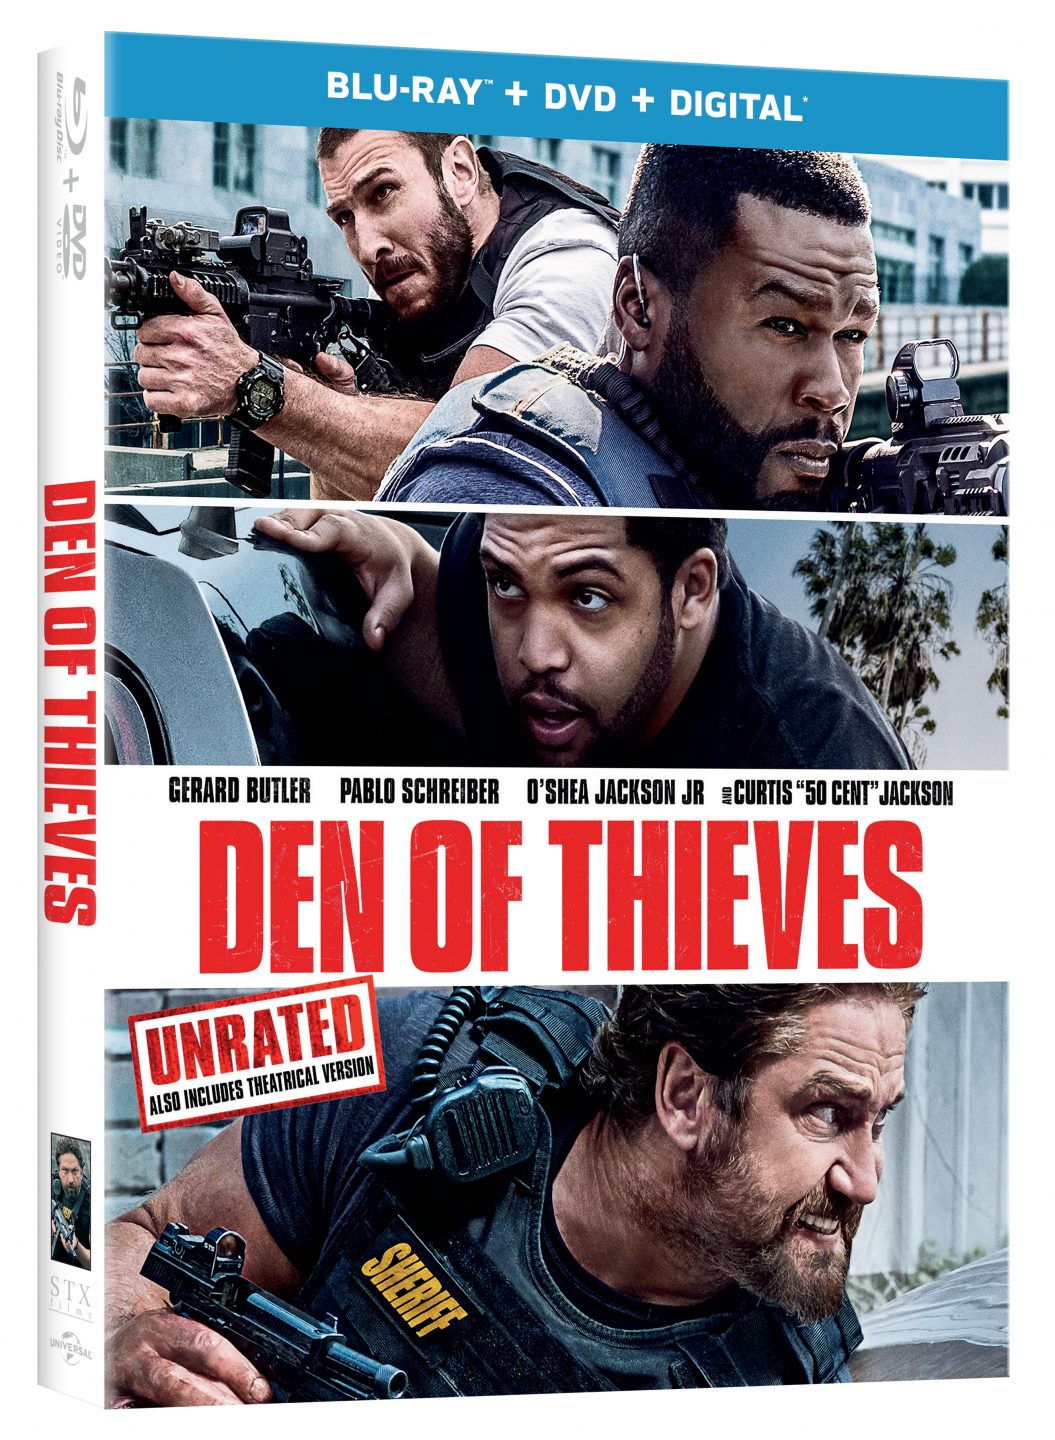 Den Of Thieves Blu-Ray Combo Pack cover (Universal Studios Home Entertainment)